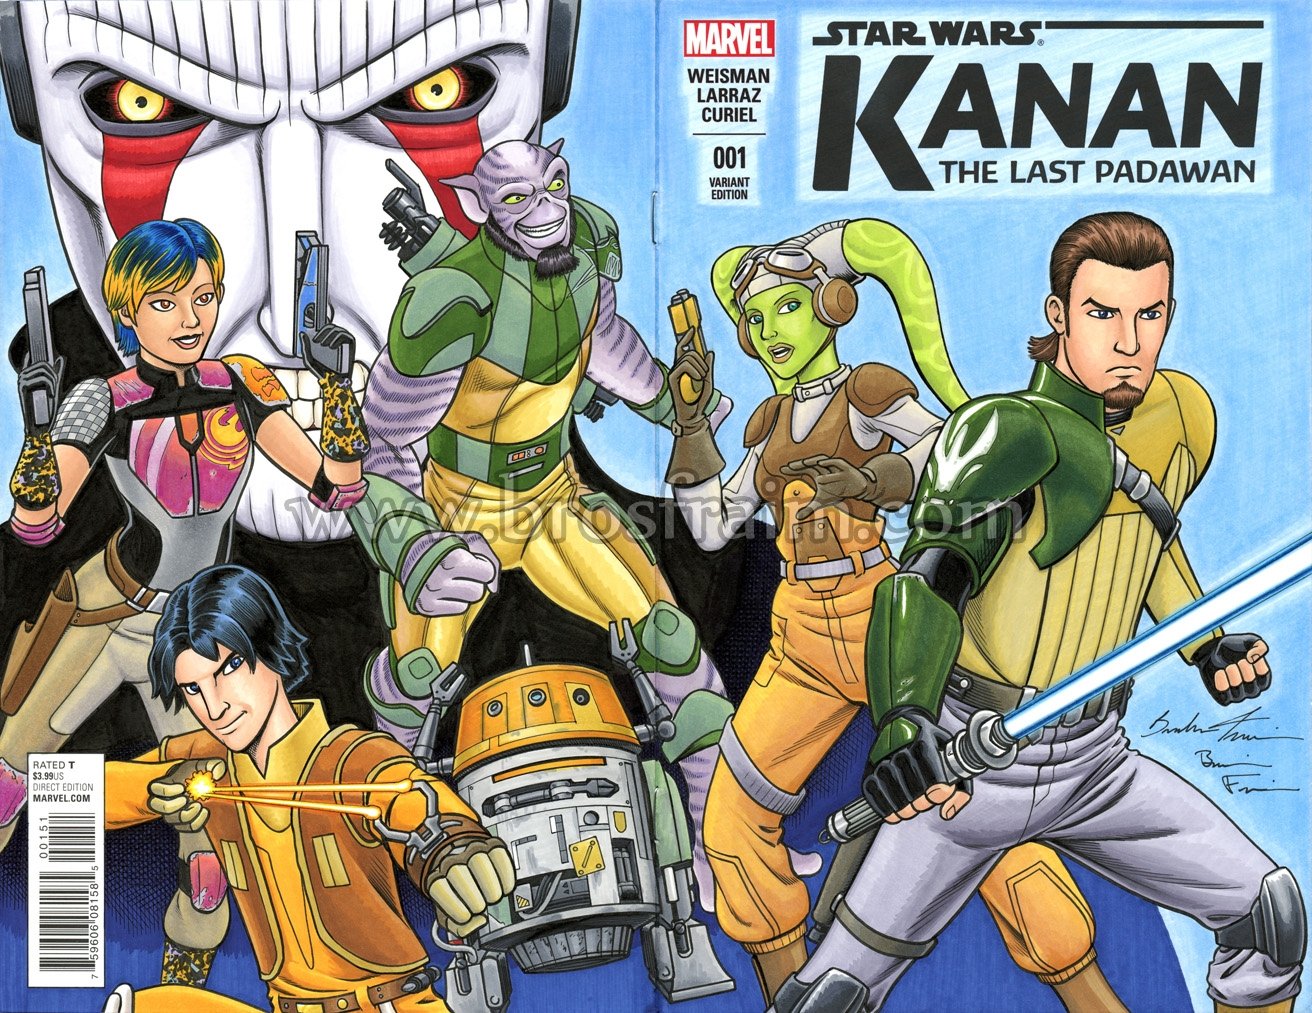 Kanan: The Last Padawan #1 – Exclusive 5-page Preview